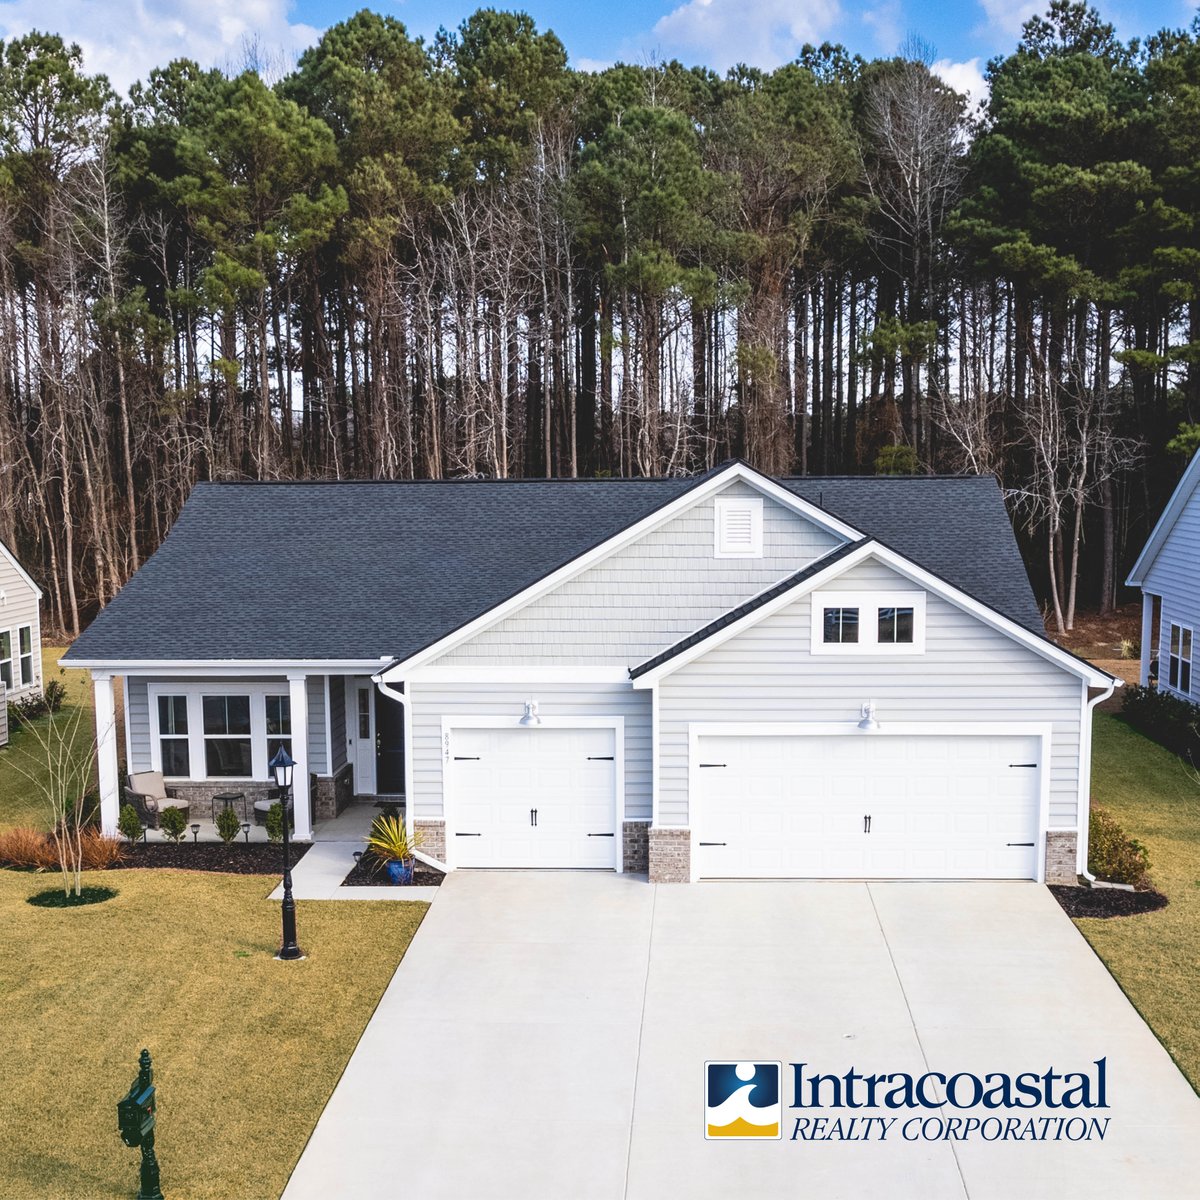 8947 Smithfield Drive NW | #BrunswickPlantation 
$425,000 | bit.ly/8947Smithfield…

Gorgeous 3 bed, 2 bath home that is better than new! House is less than 1 year old with updates added. 

#CalabashNC #Amenities #IntracoastalRealty #RealEstate #RealEstateAgent #Home #SunsetBeach